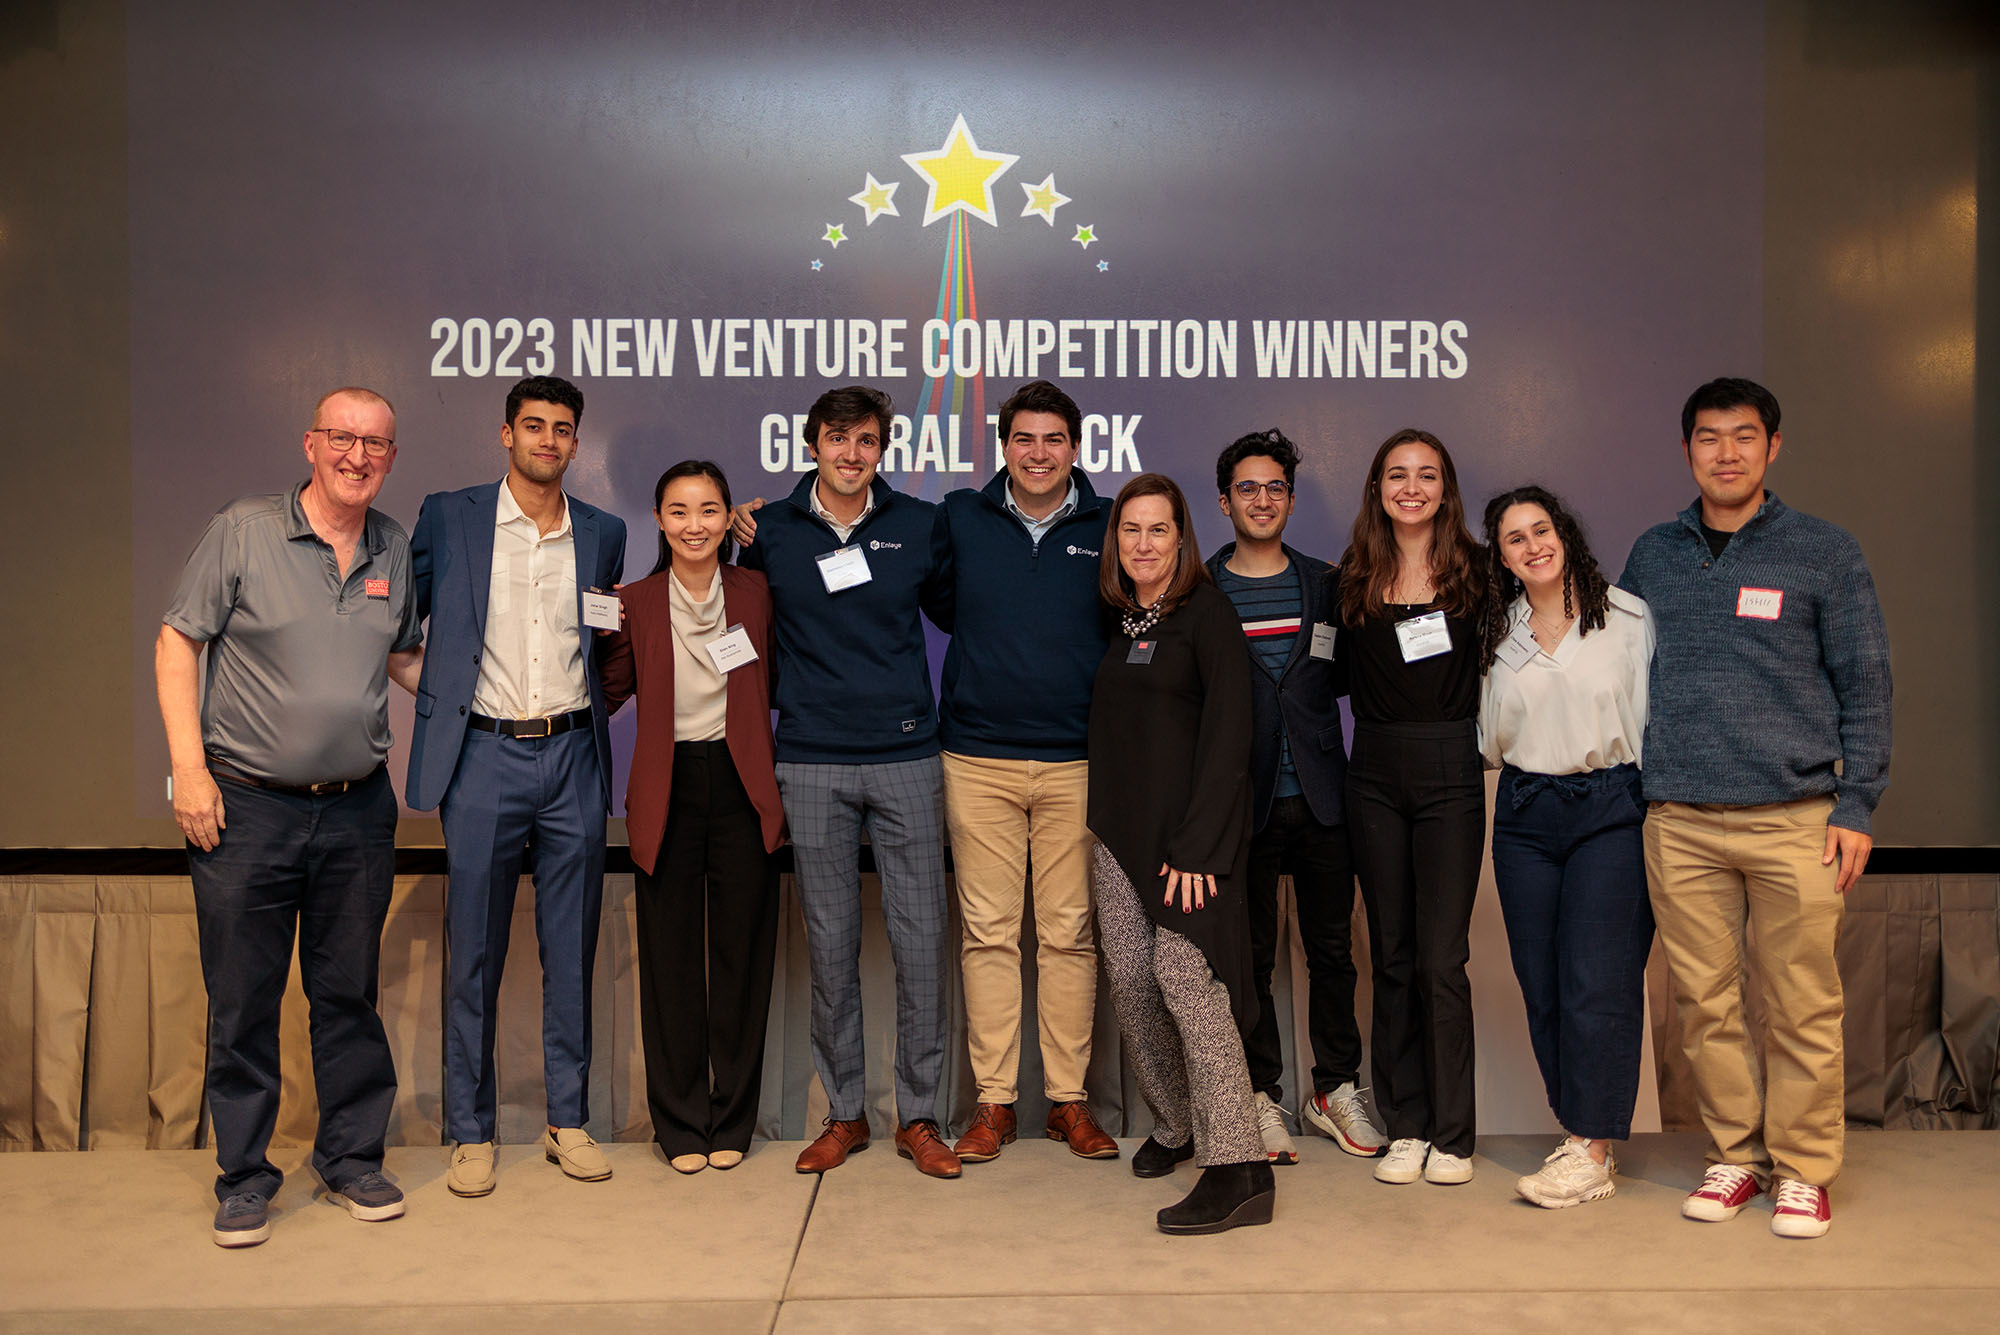 Photo: A group of people stand and pose for a photo in front of a sign that reads "2023 New Venture Competition Winners". Ian Mashiter, director of curriculum at Innovate@BU (from left), Johar Singh (Questrom’24), Shen Ning (MED’24), Stamatios Liapis (MED’23), Philippe Rival (Harvard Business School), Siobhan Dullea, executive director of Innovate@BU, Caspian Chaharom (CAS’23), Kelsey Mann (CFA’23), Chloe Adamowicz (CAS’23), and Harunobu Ishii (MET’22).